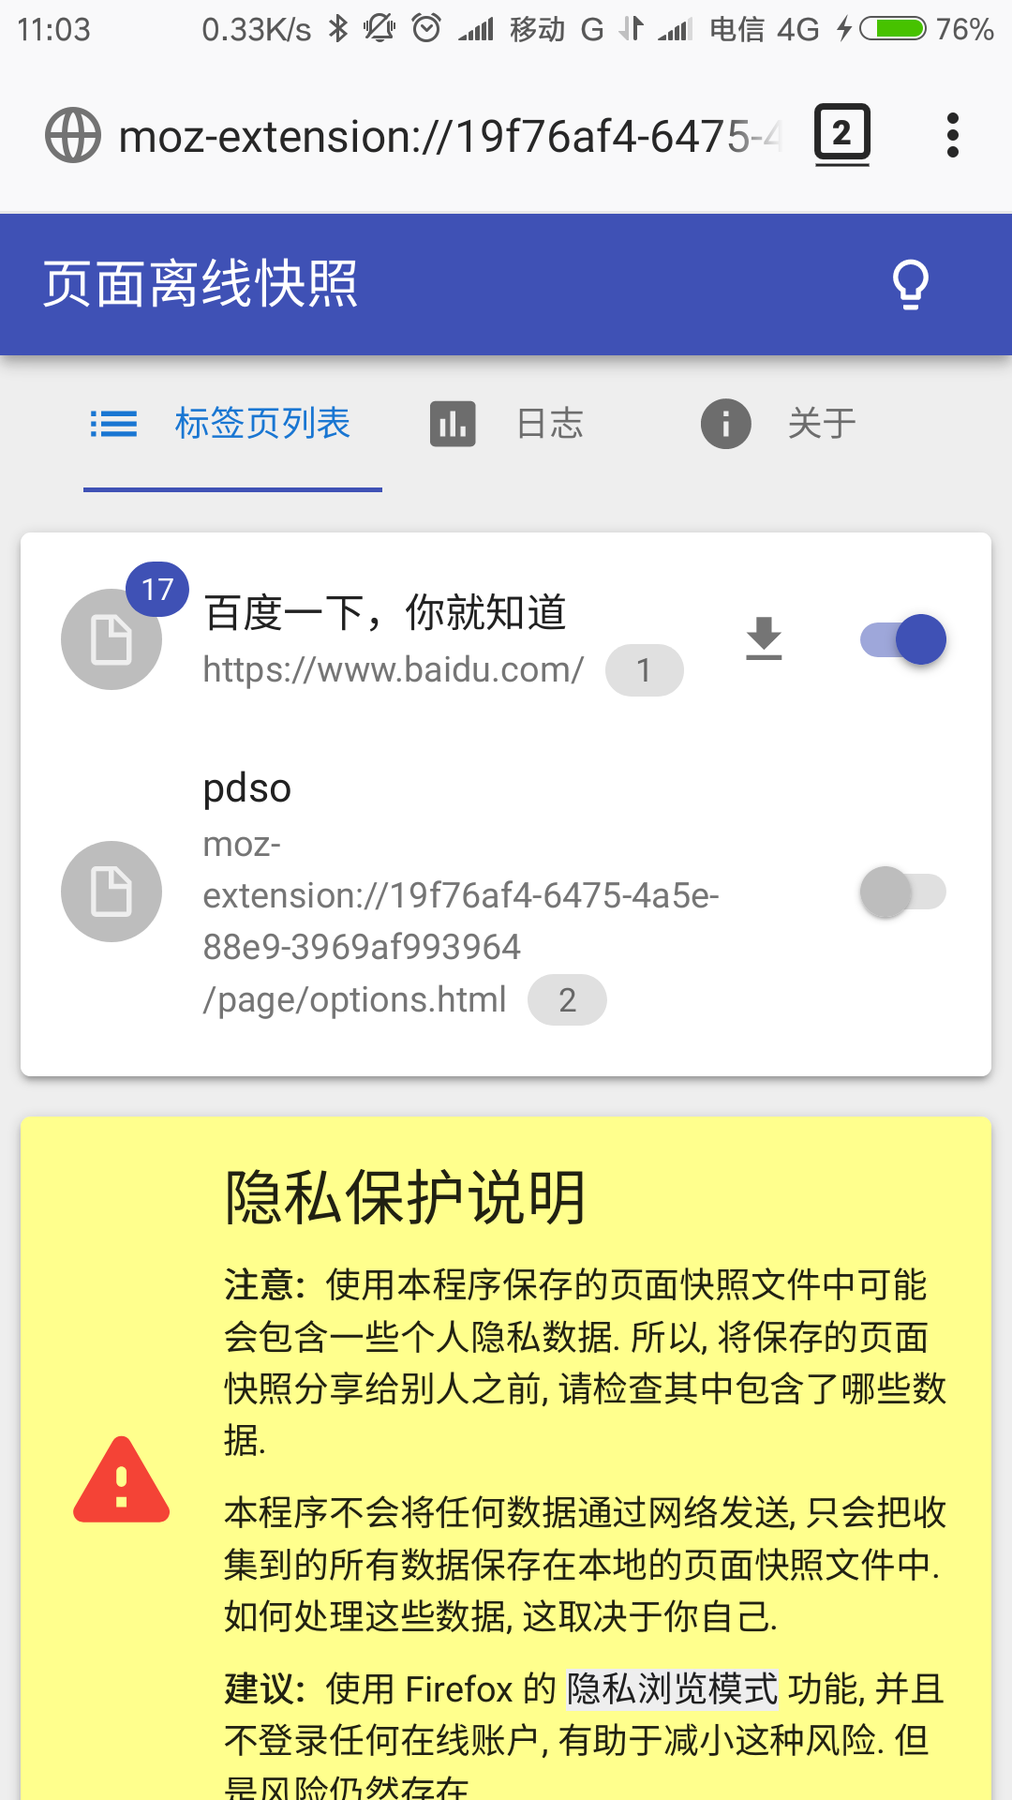 pdso: Page DOM Snapshot for Offline